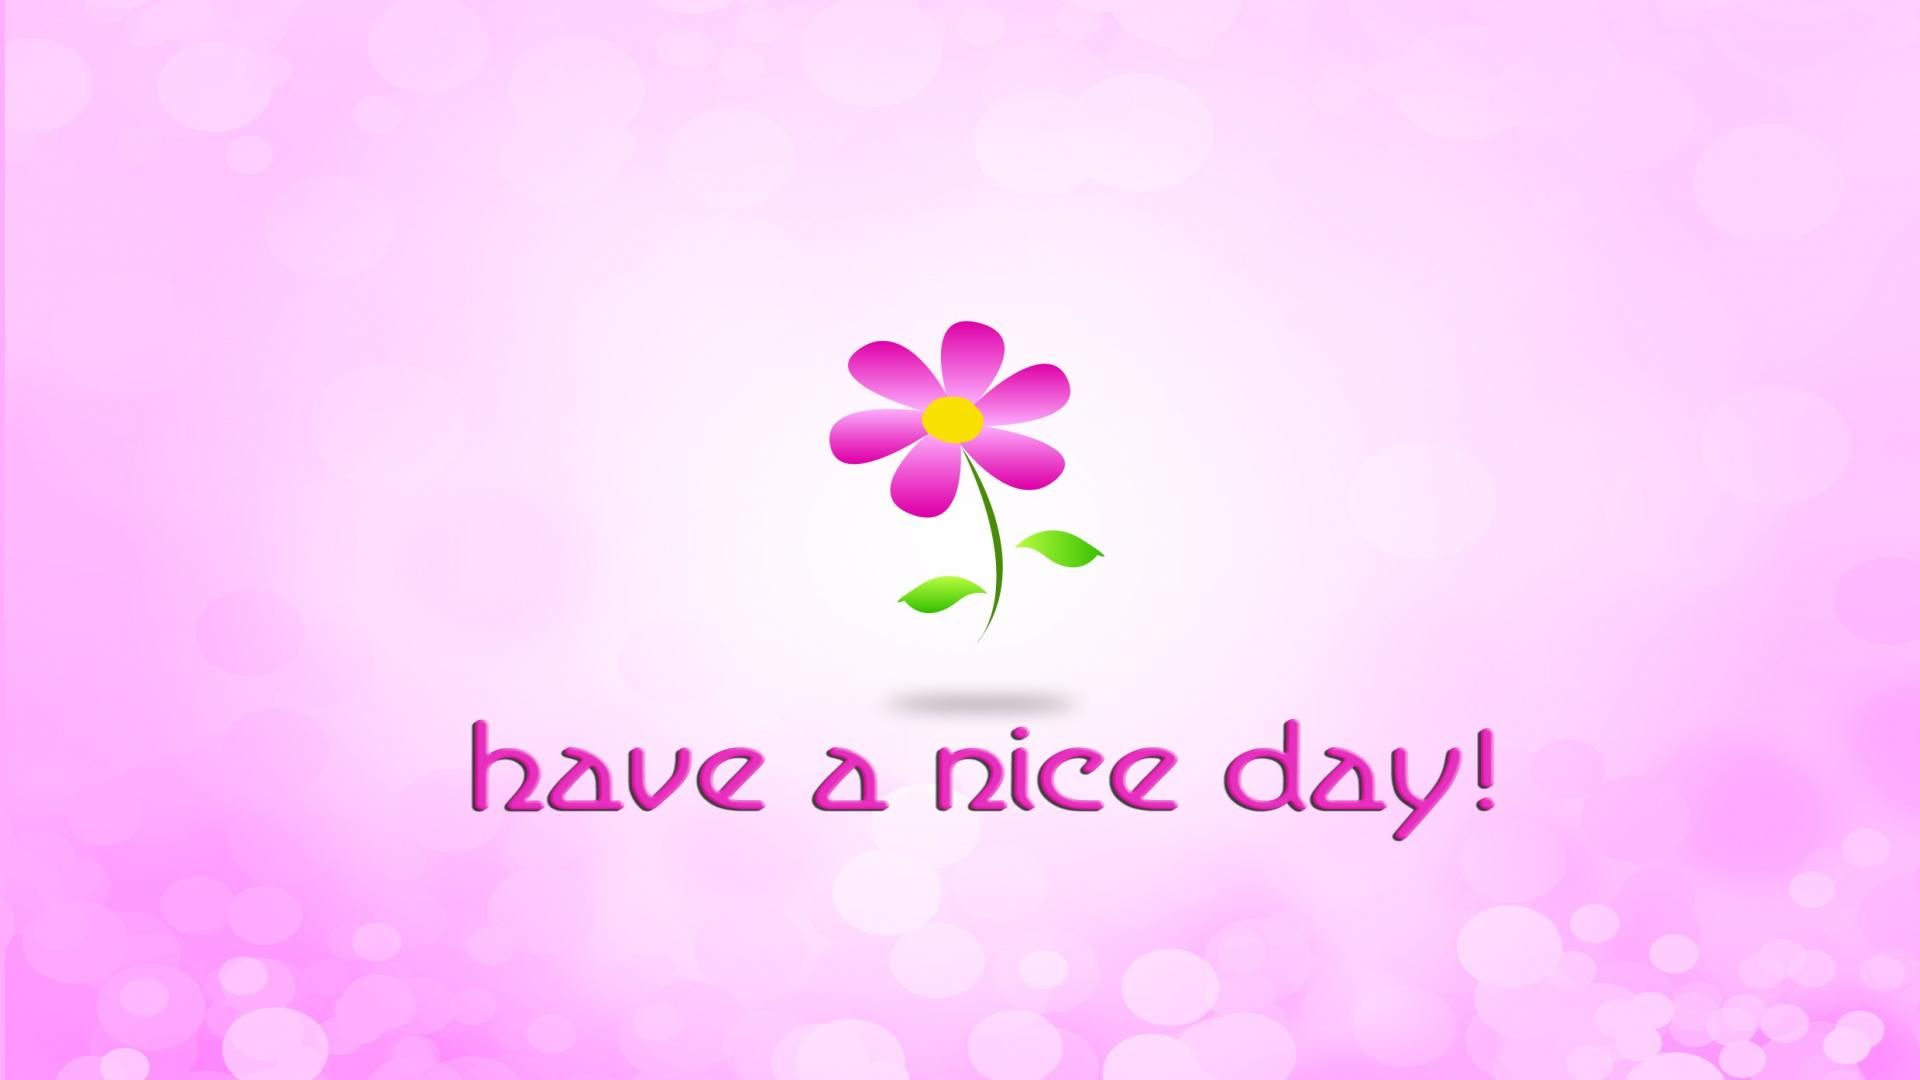 Have a nice day wish